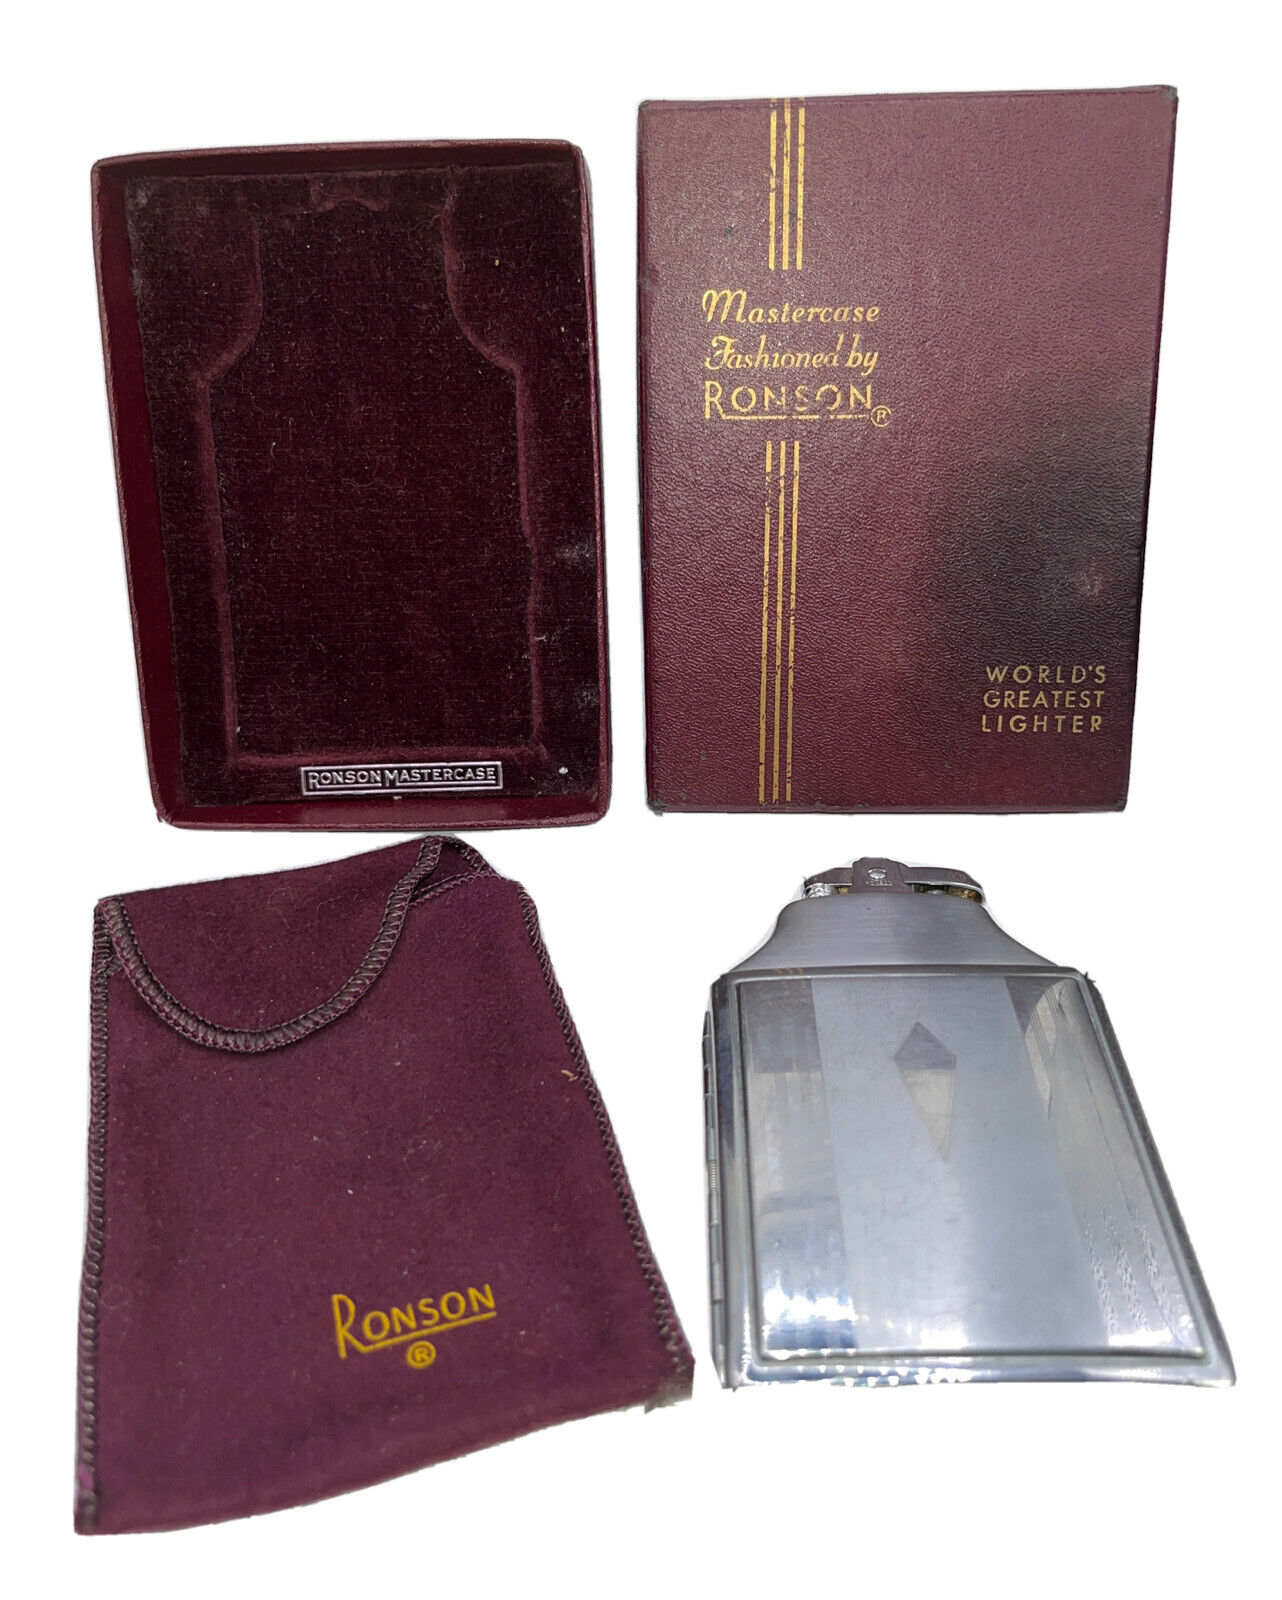 Vintage Mastercase Fashioned By RONSON World\'s Greatest Lighter Original Box 